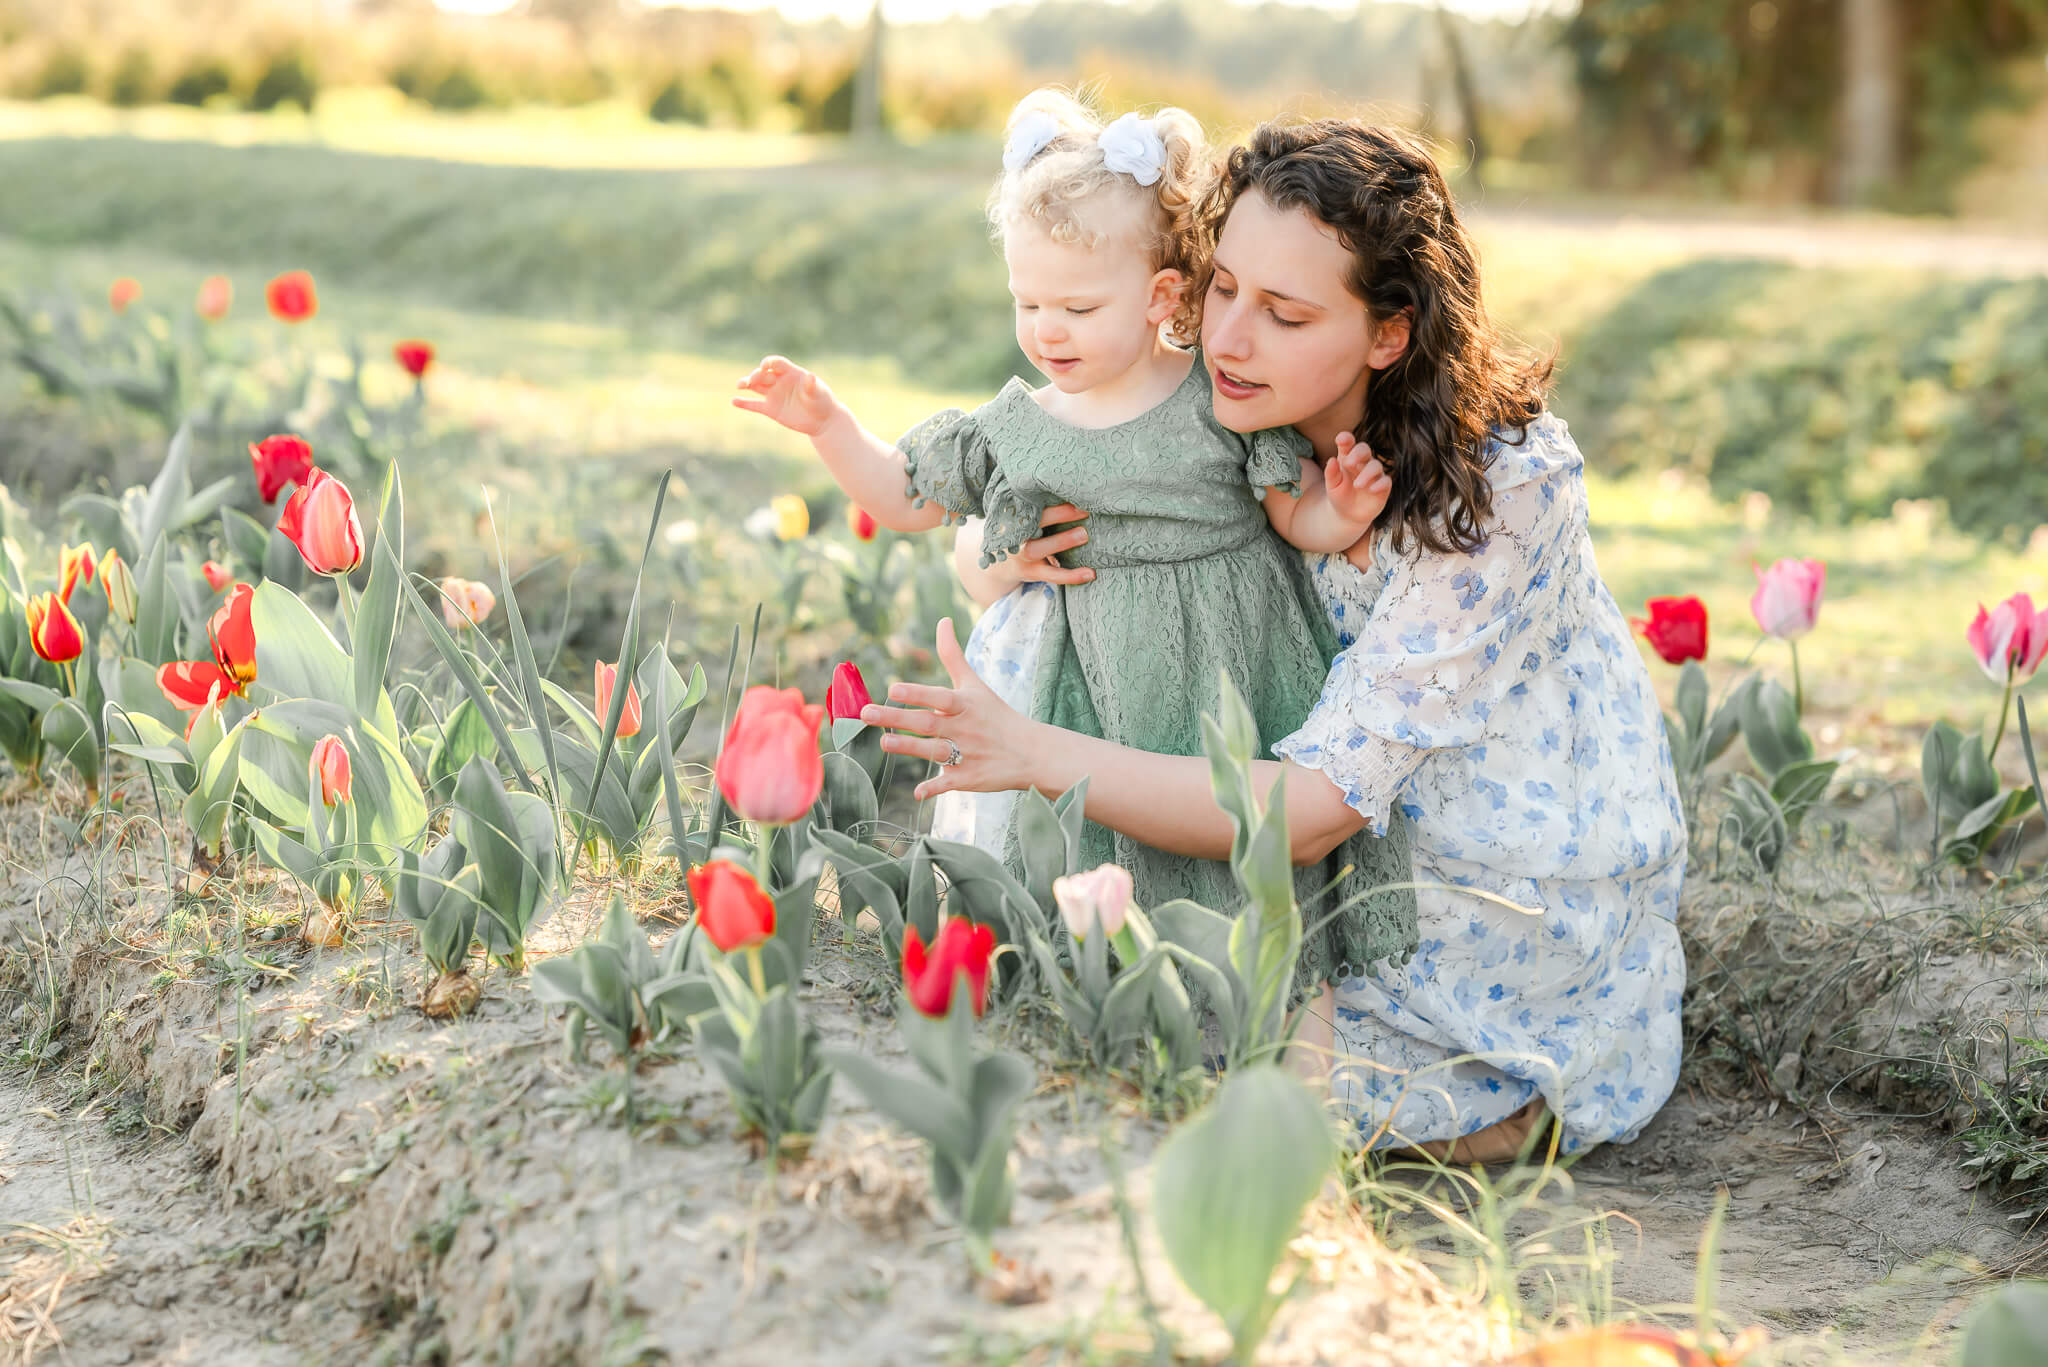 A woman wearing a white dress with blue flowers looks at tulips at Greenbrier Farms with her toddler, who is wearing a green dress.